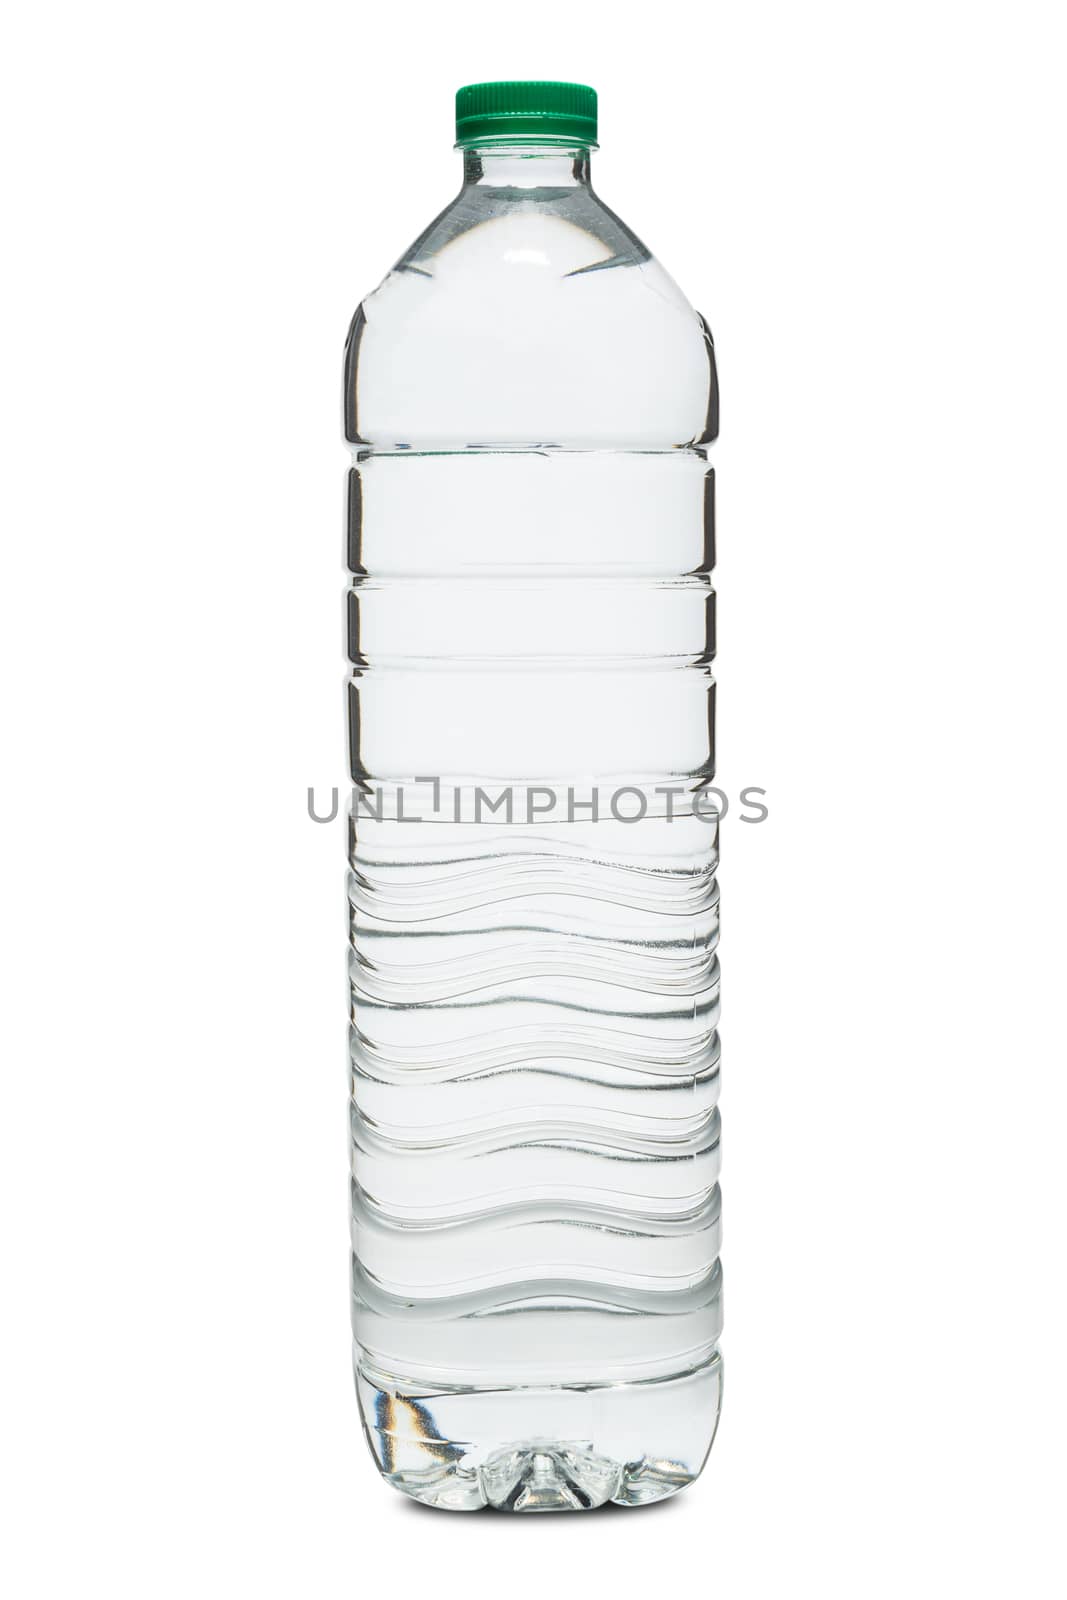 A Plastic water bottle with clipping path isolated on a white background.